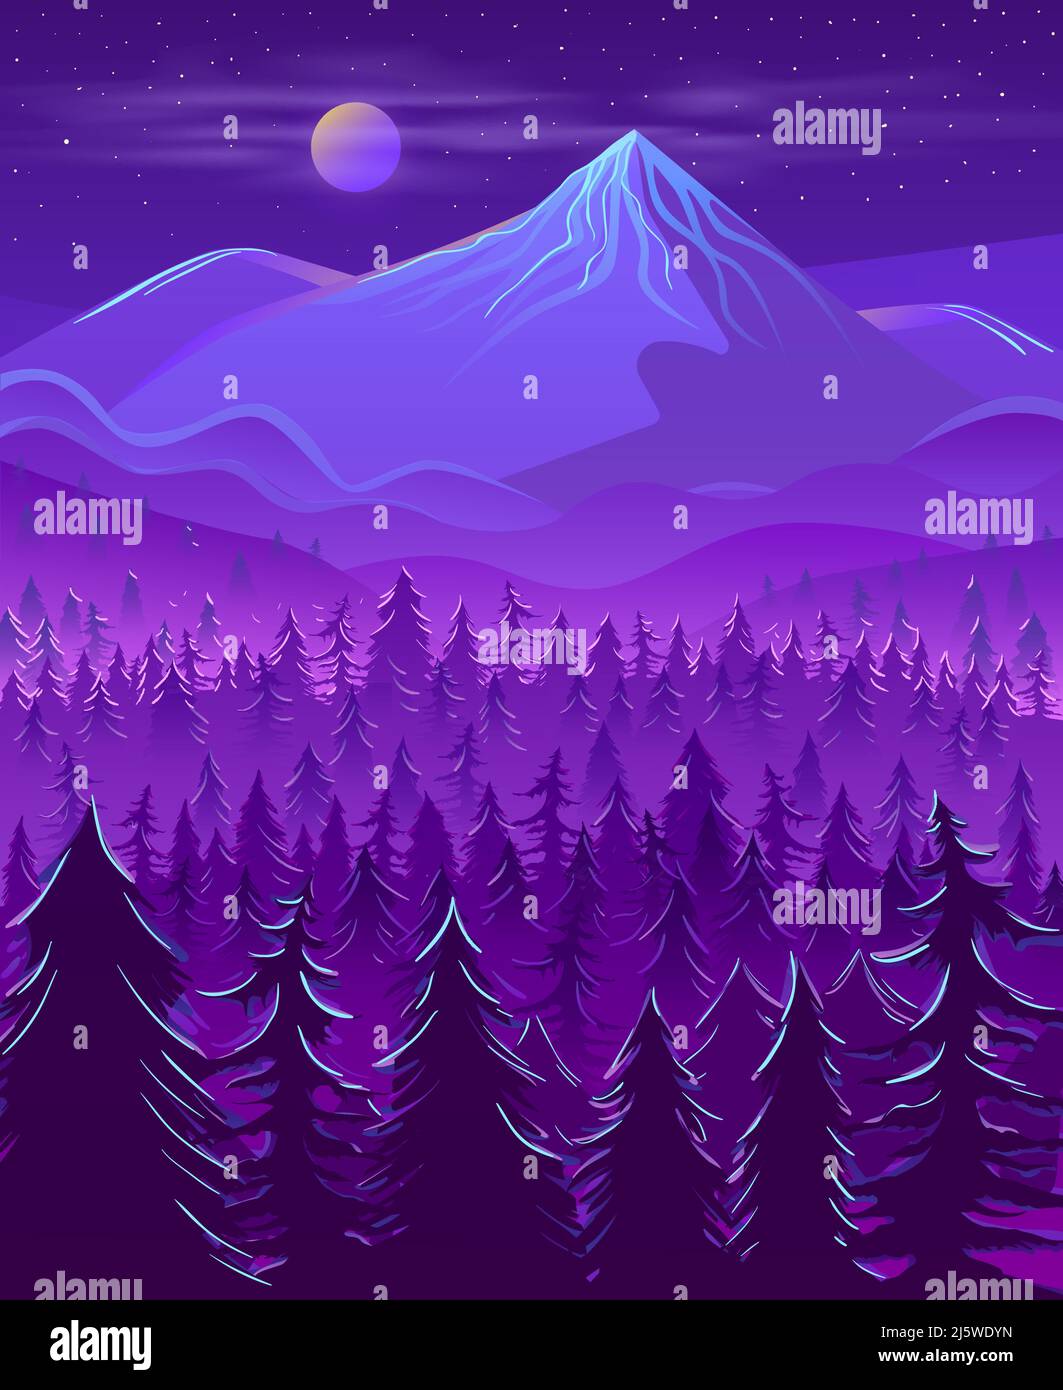 Cold and wild northern land night landscape cartoon vector in violet neon colors with full moon disk in mist under snow-cowered mountain peak or hill, Stock Vector